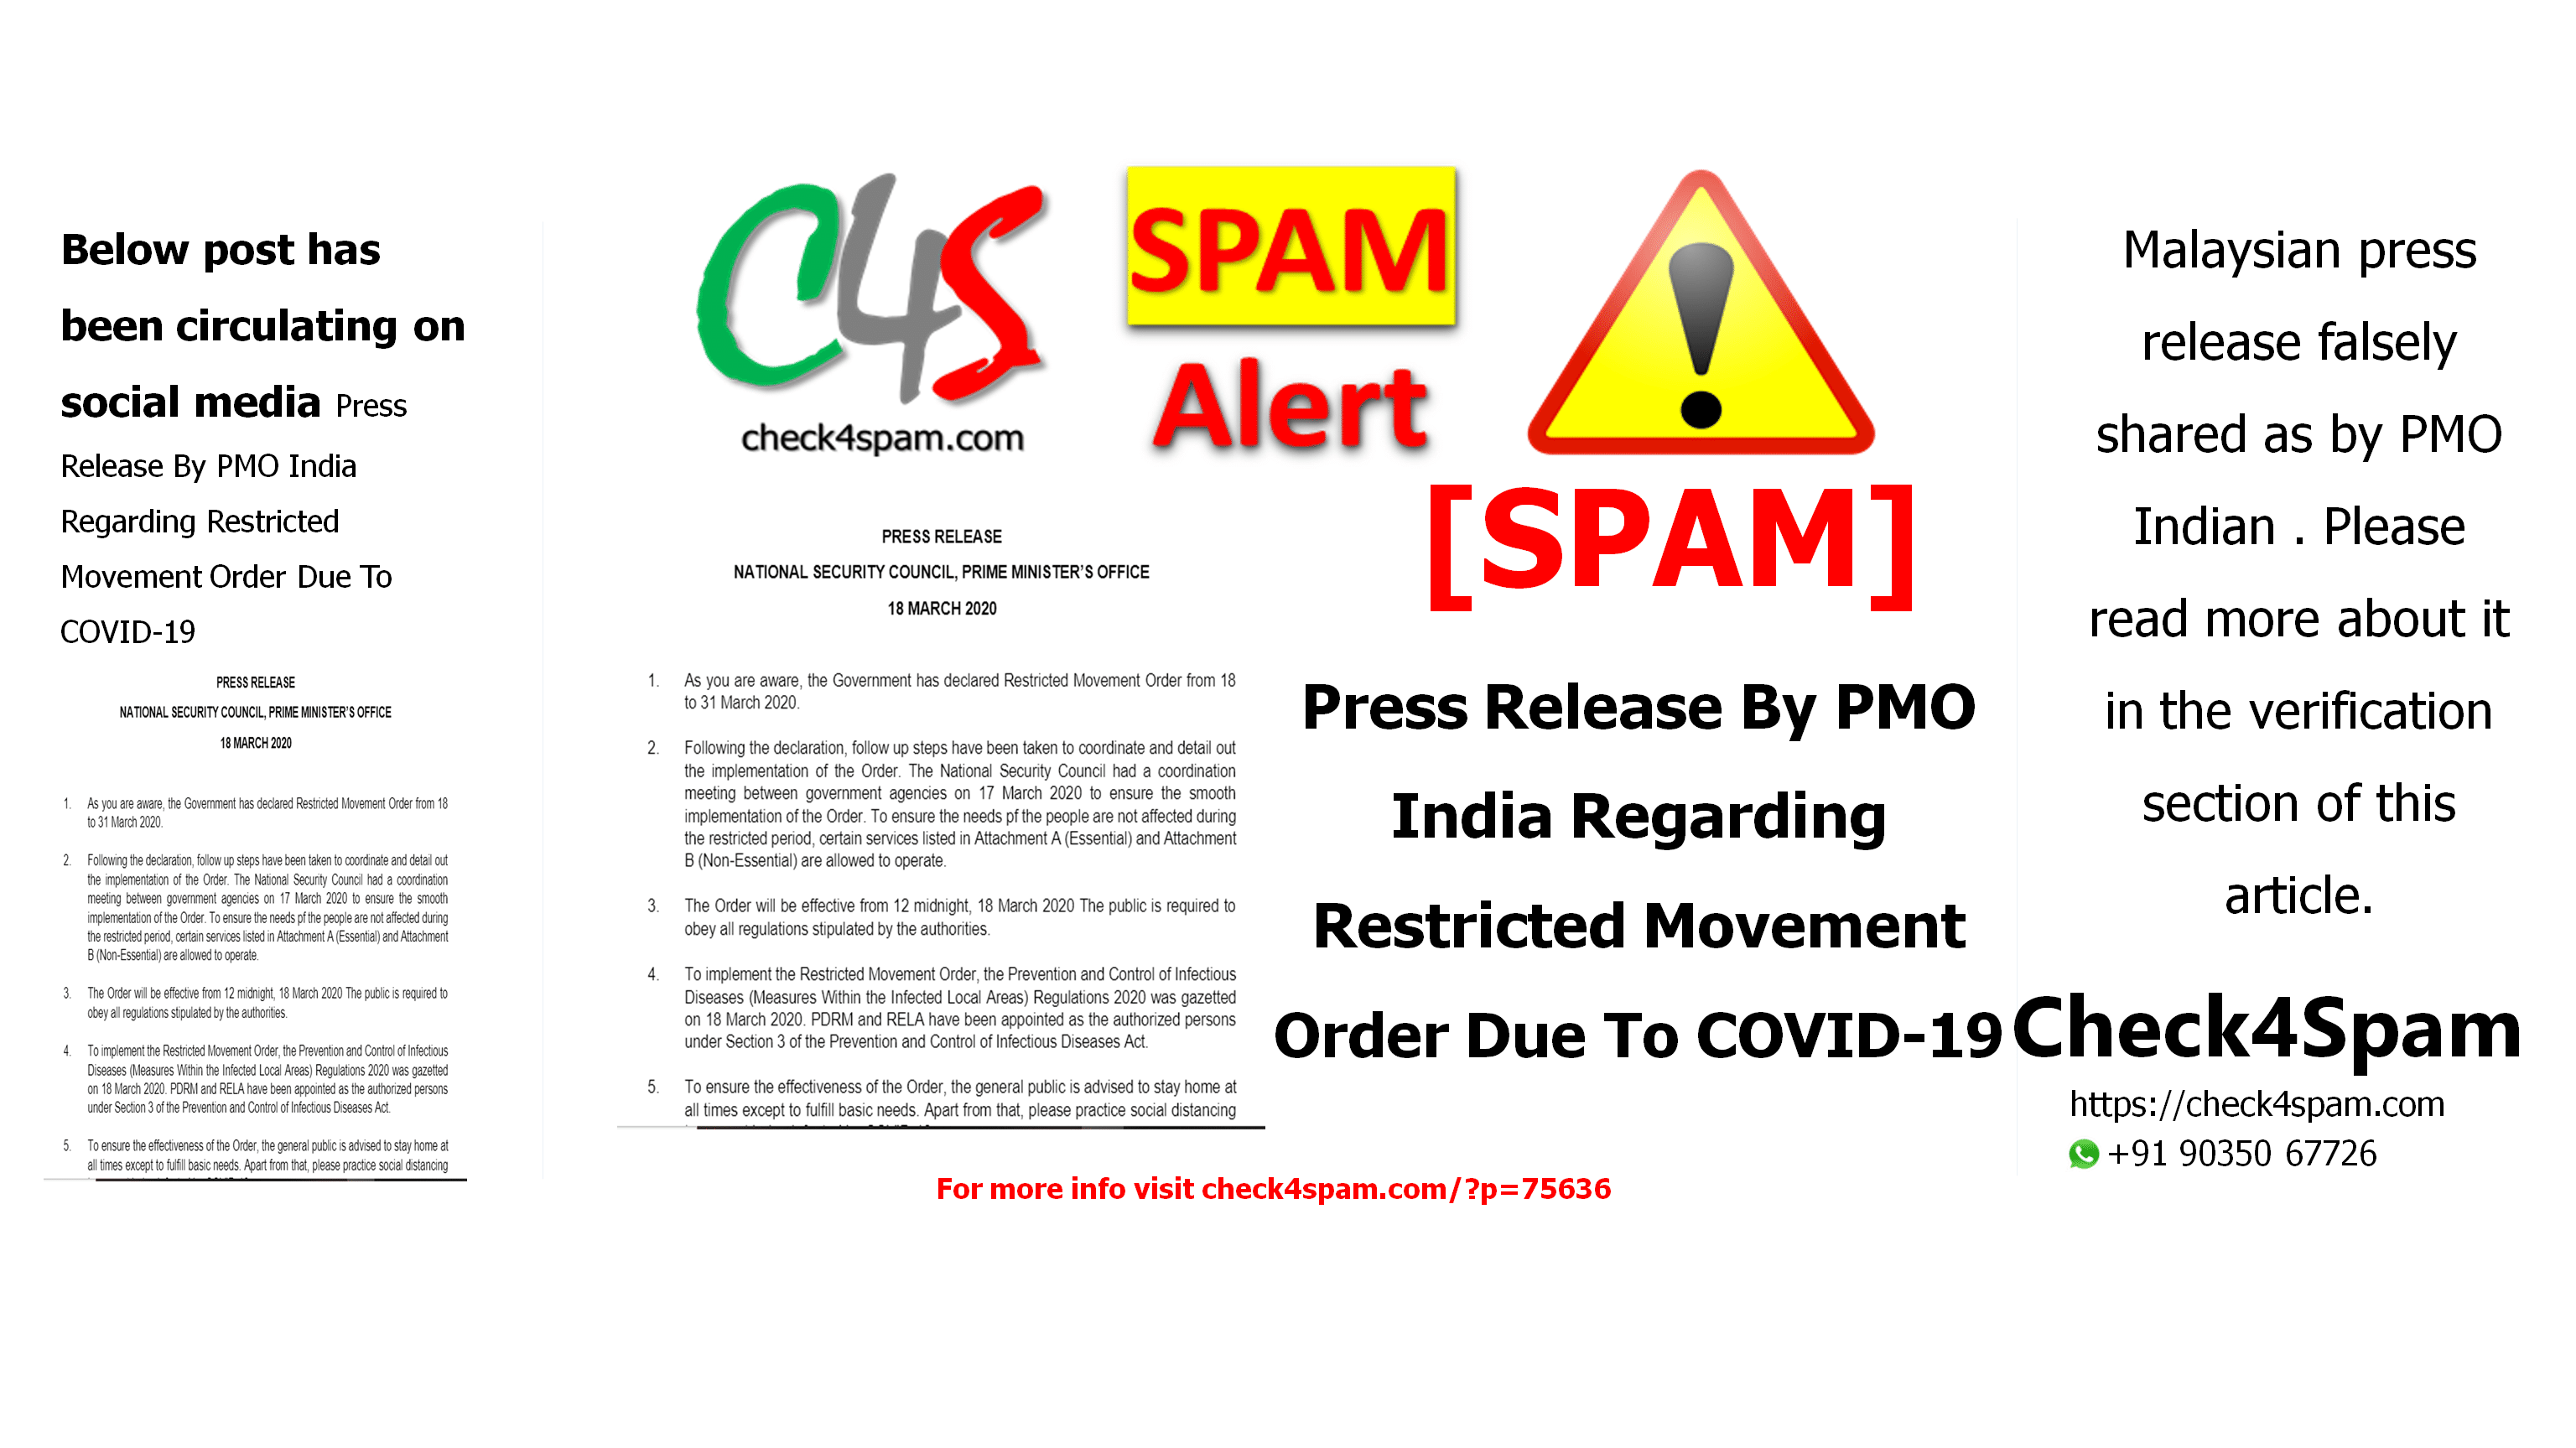 Press Release By PMO India Regarding Restricted Movement Order Due To COVID-19